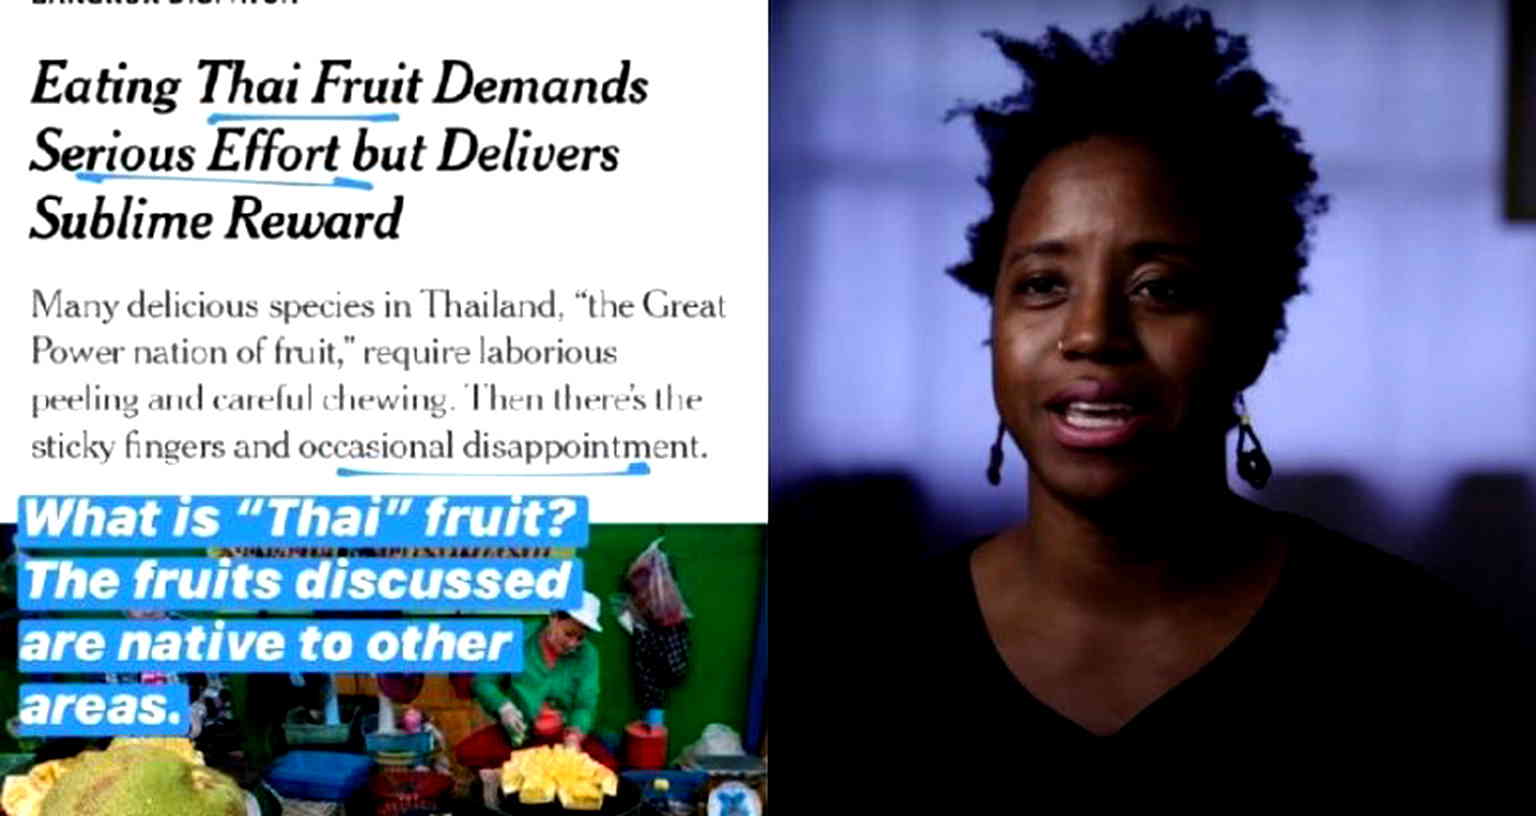 Award-Winning Writer Schools the New York Times Over ‘Colonial’ Article on Southeast Asian Fruits